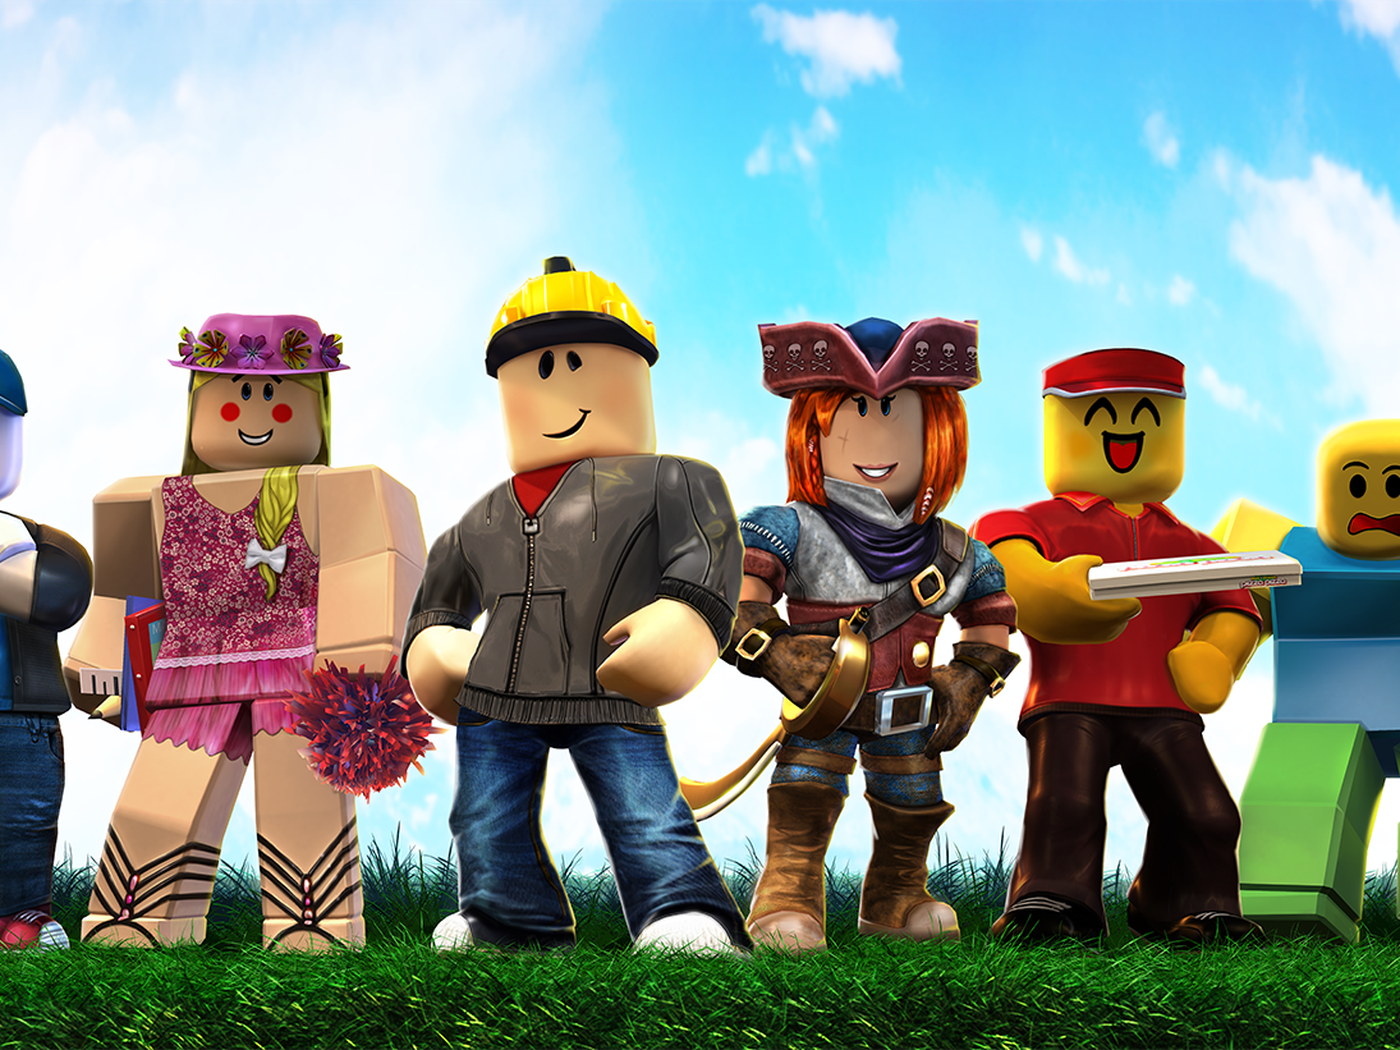 Roblox surpasses Minecraft with 100 million monthly players